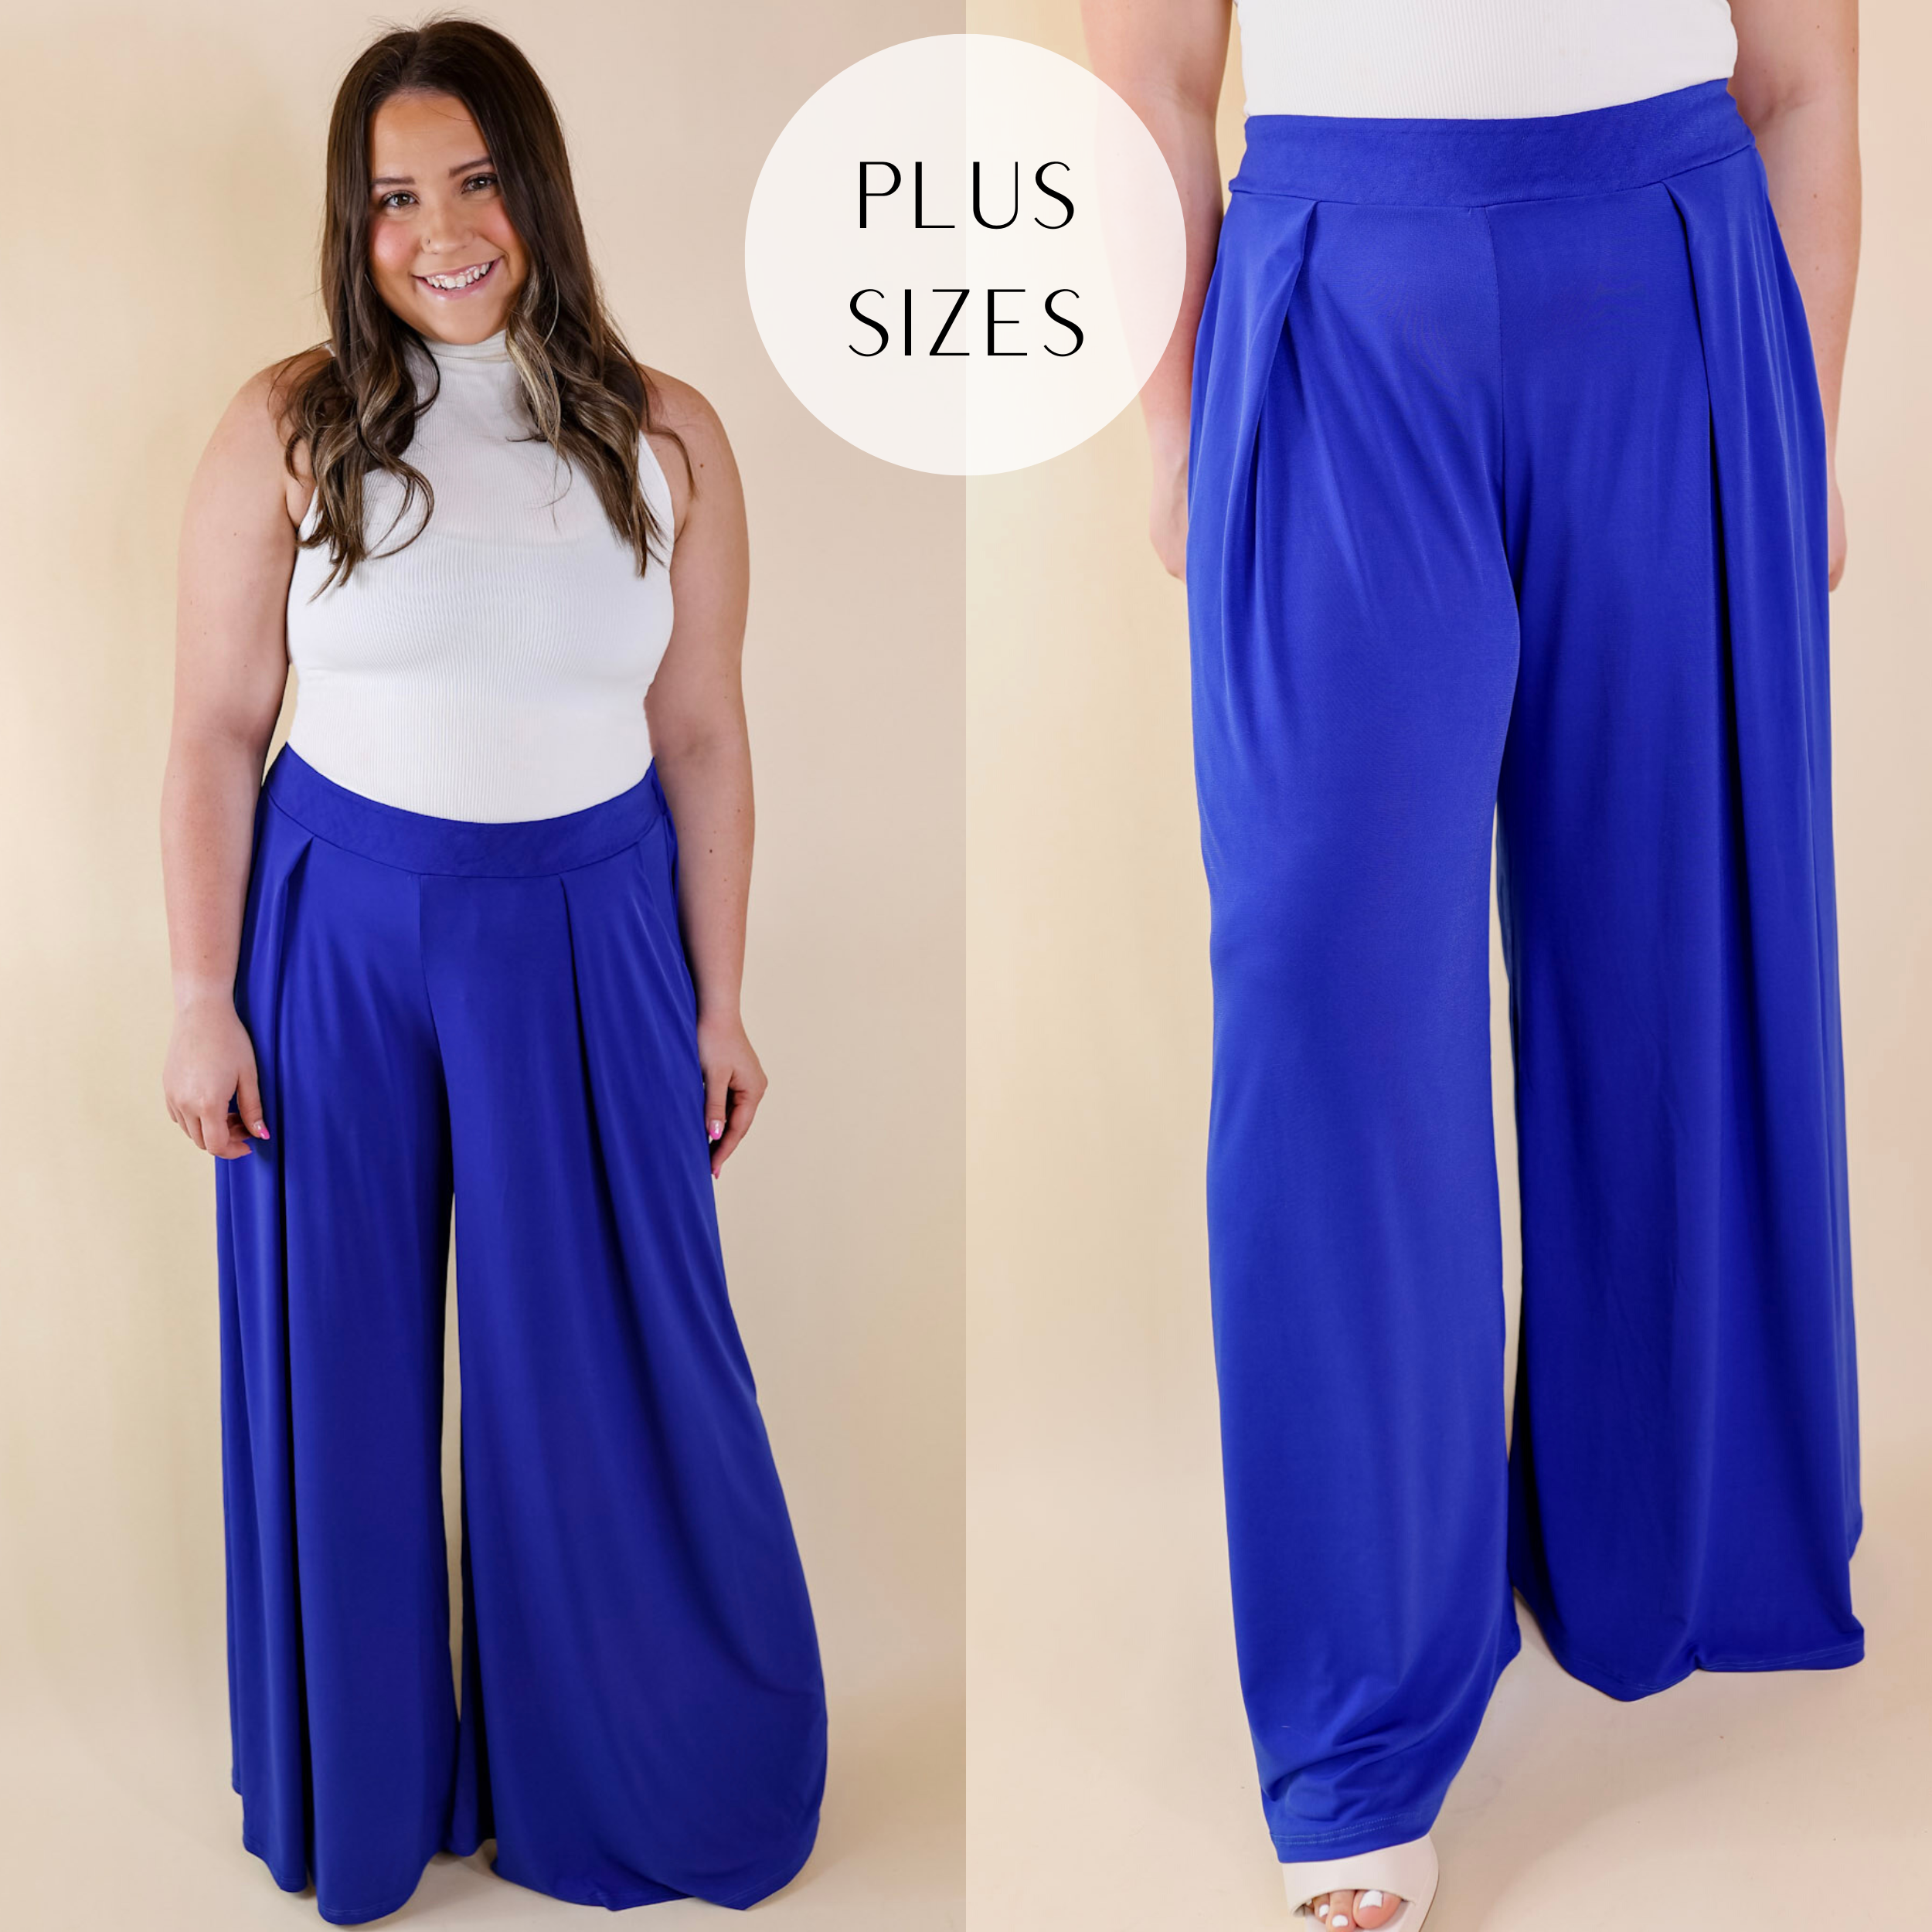 Floerns Women's Casual Wide Leg High Waisted Palazzo Pleated Pants Trousers  Royal Blue M at Amazon Women's Clothing store